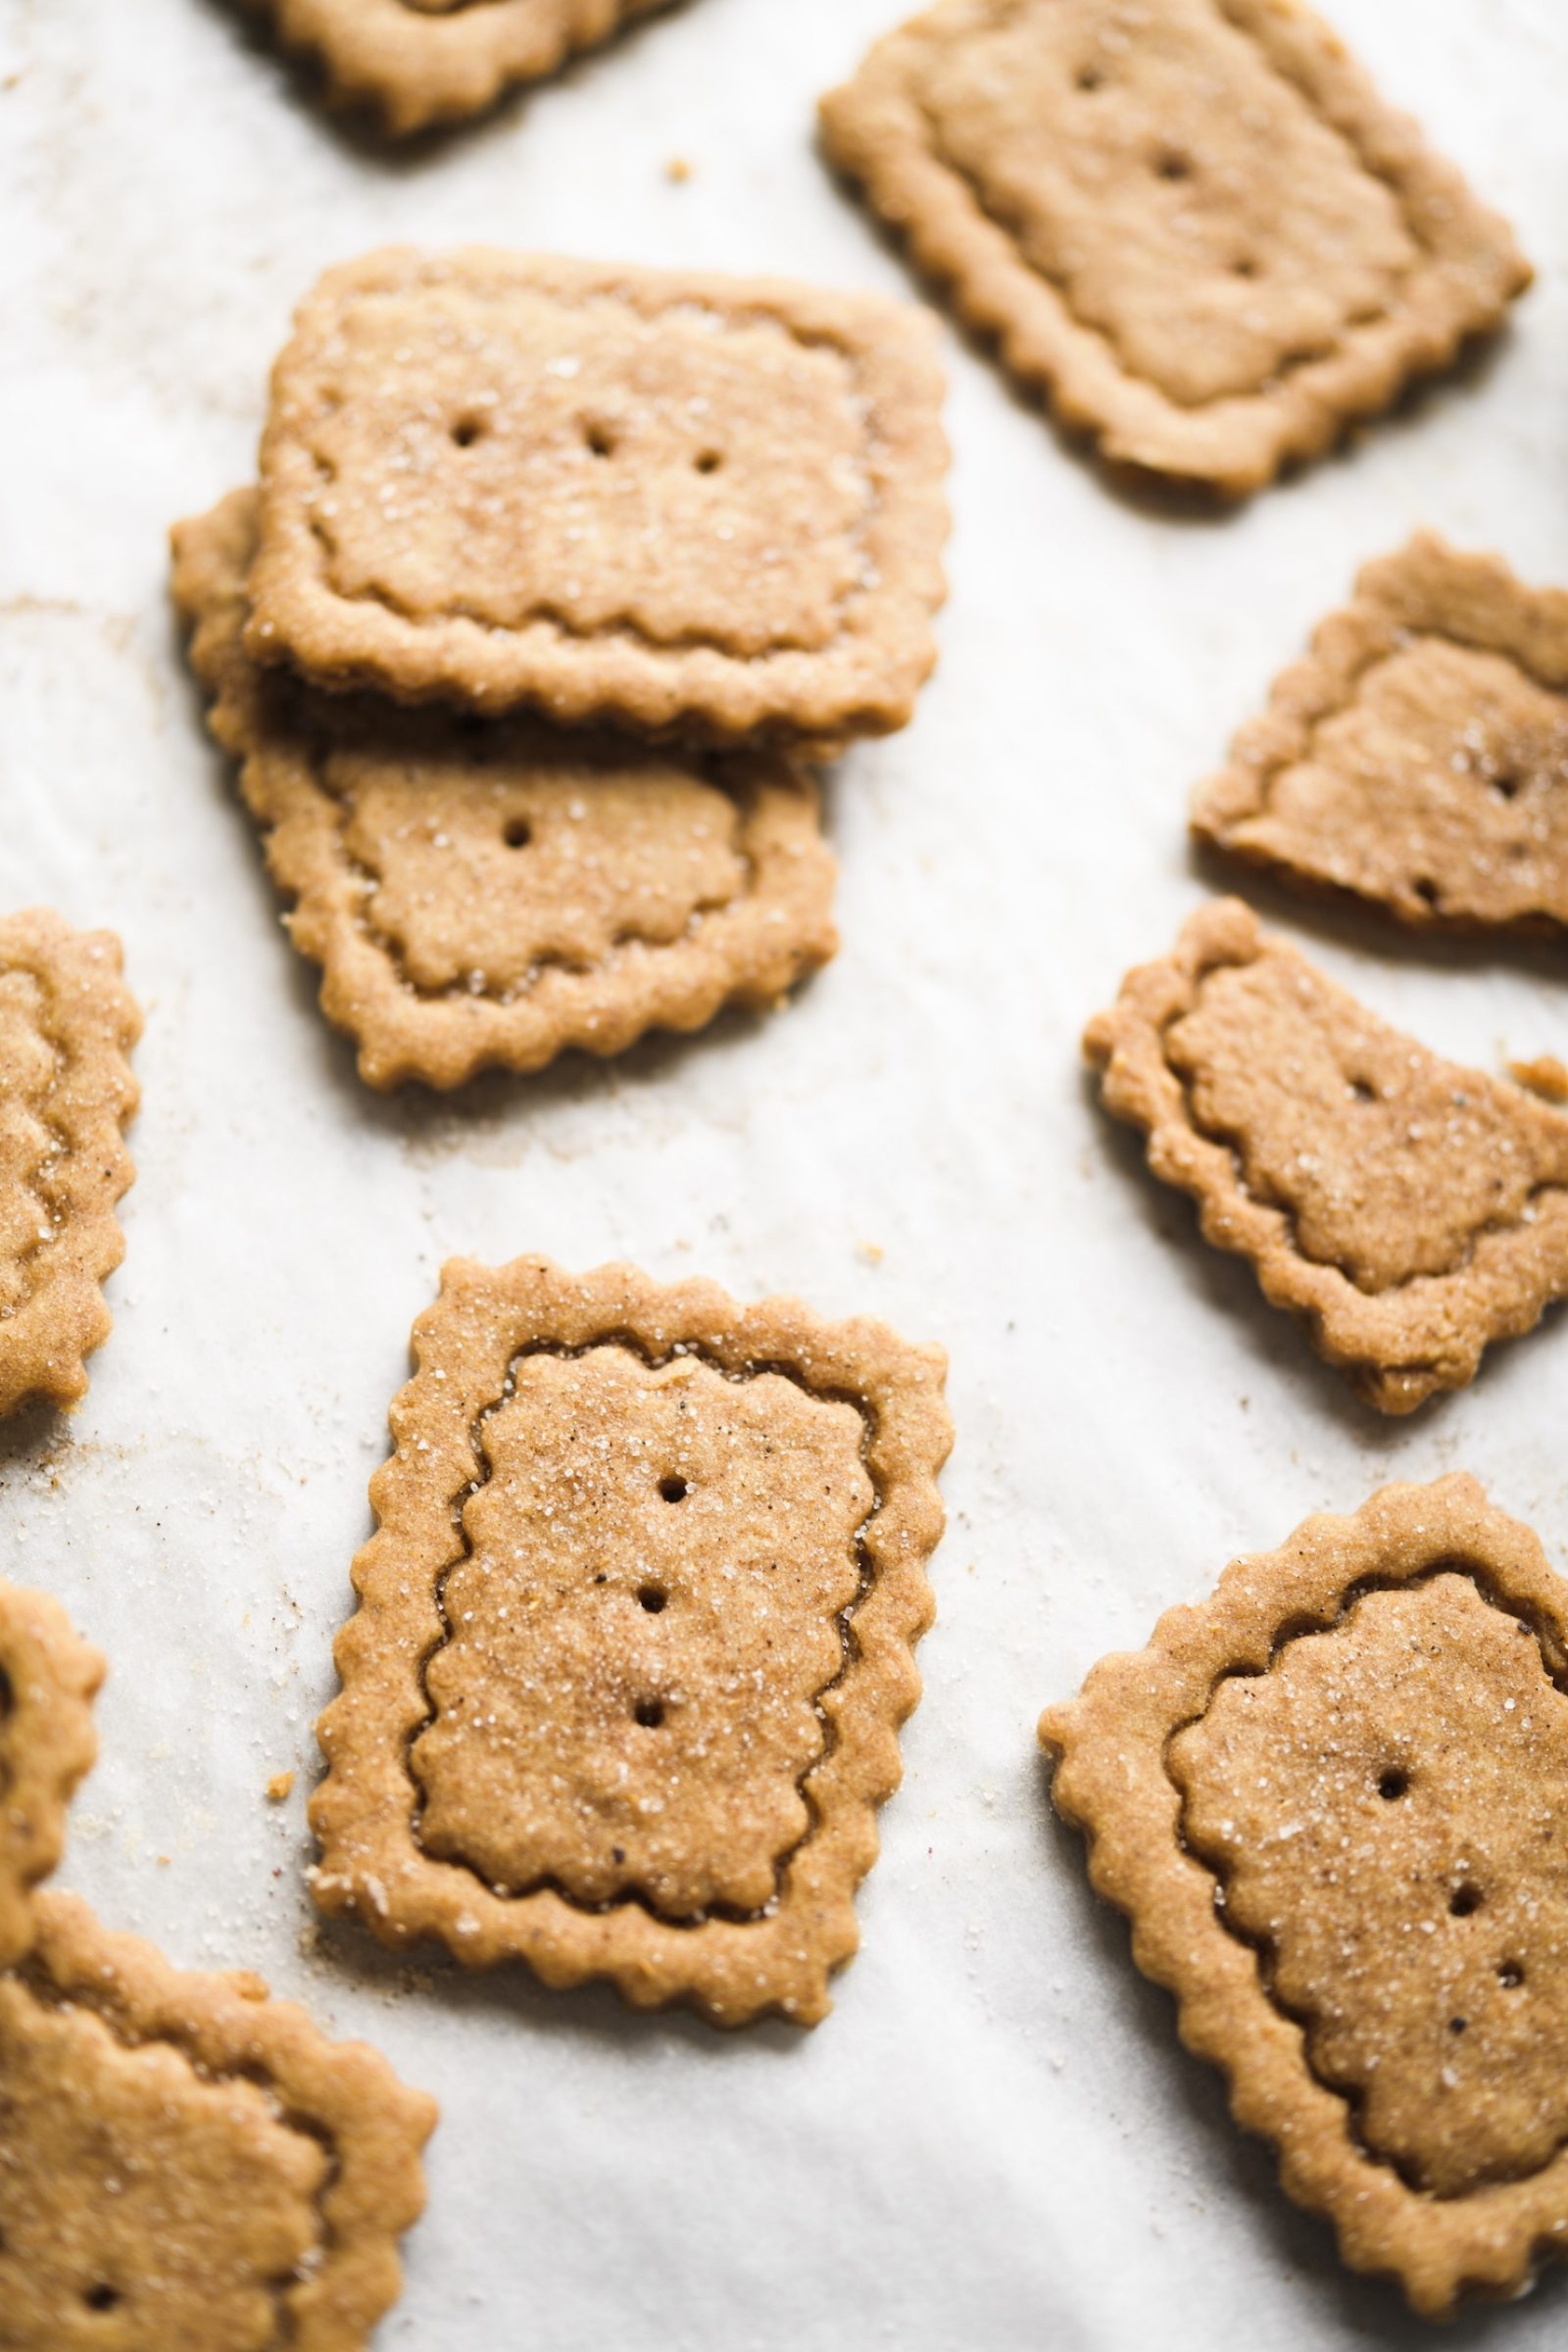 Speculoos biscuits - the world's favourite snack? 